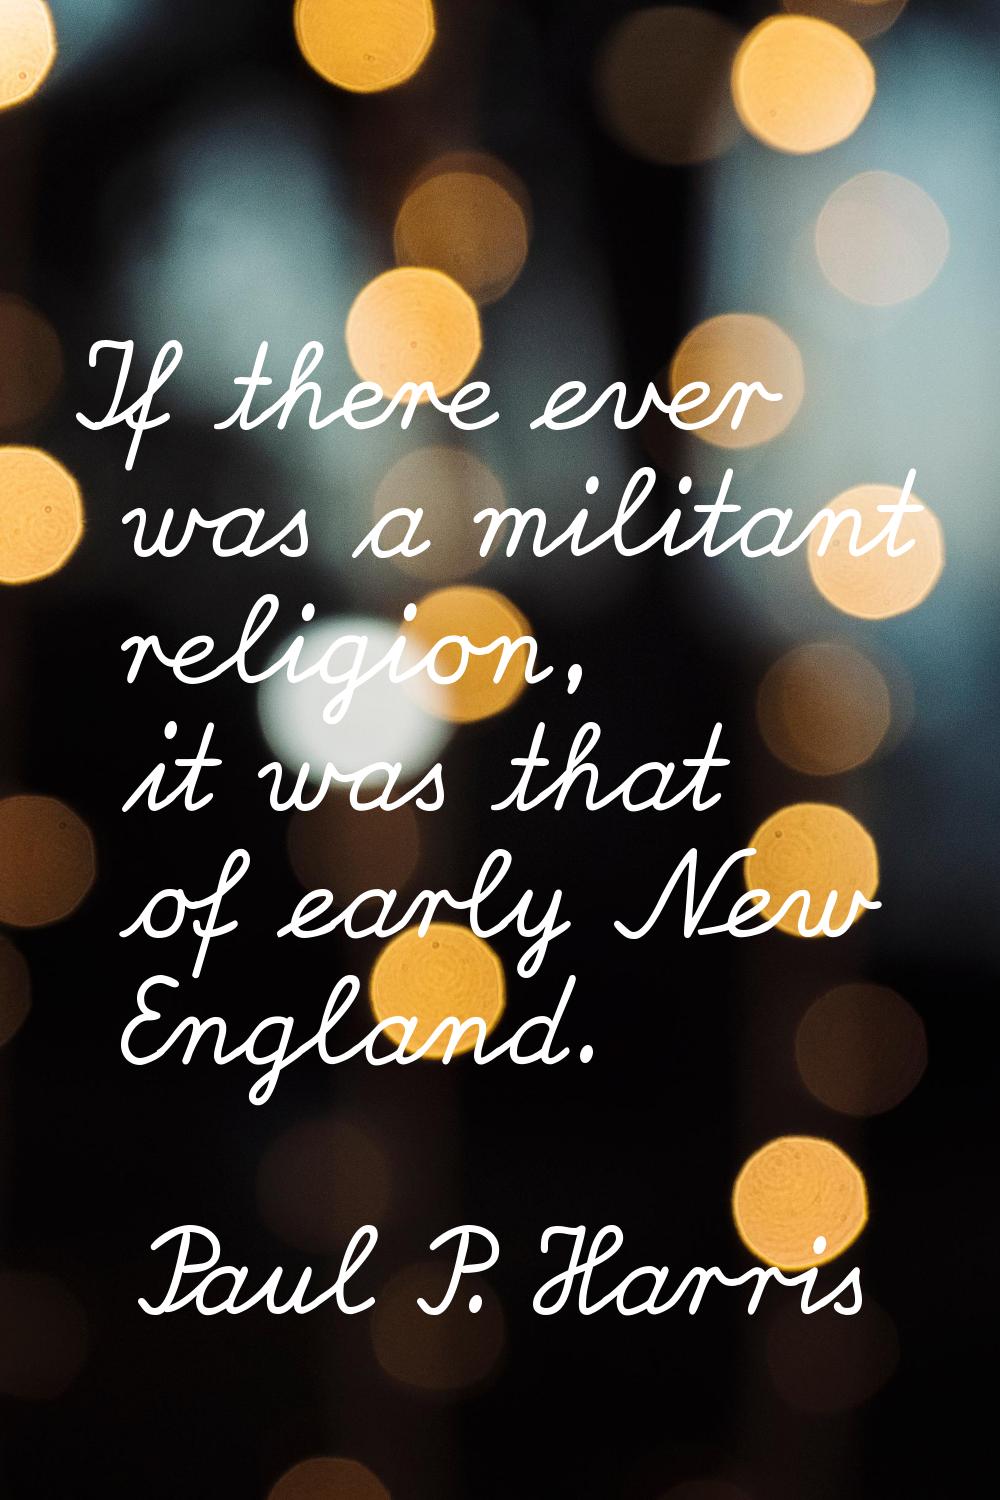 If there ever was a militant religion, it was that of early New England.